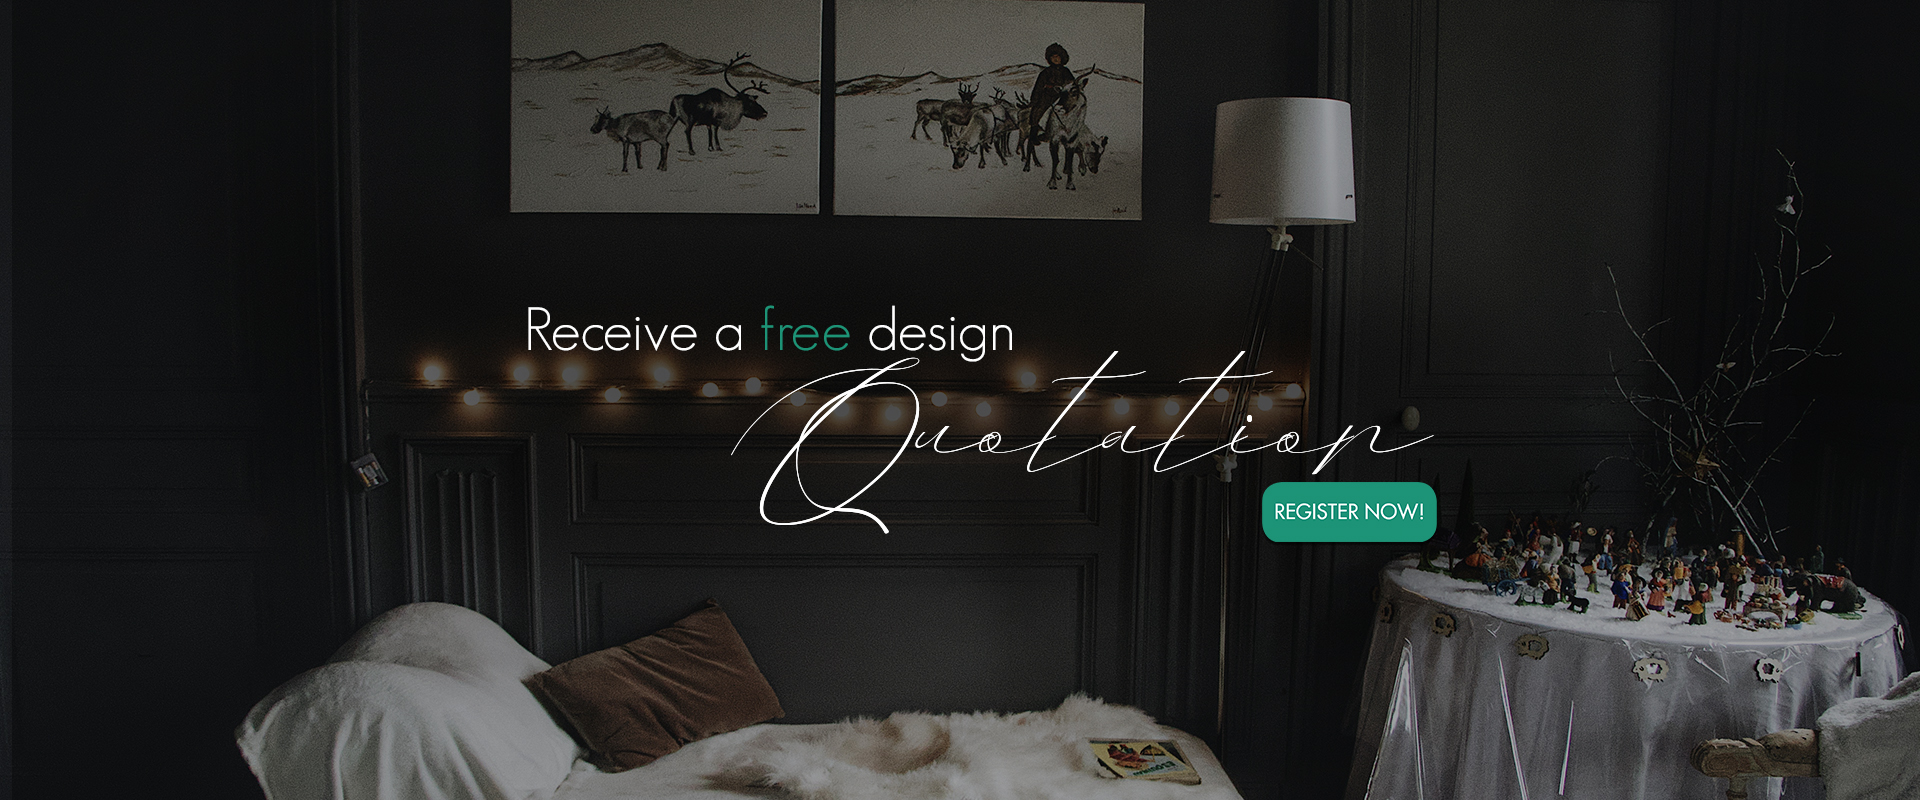 Receive a free design quotation